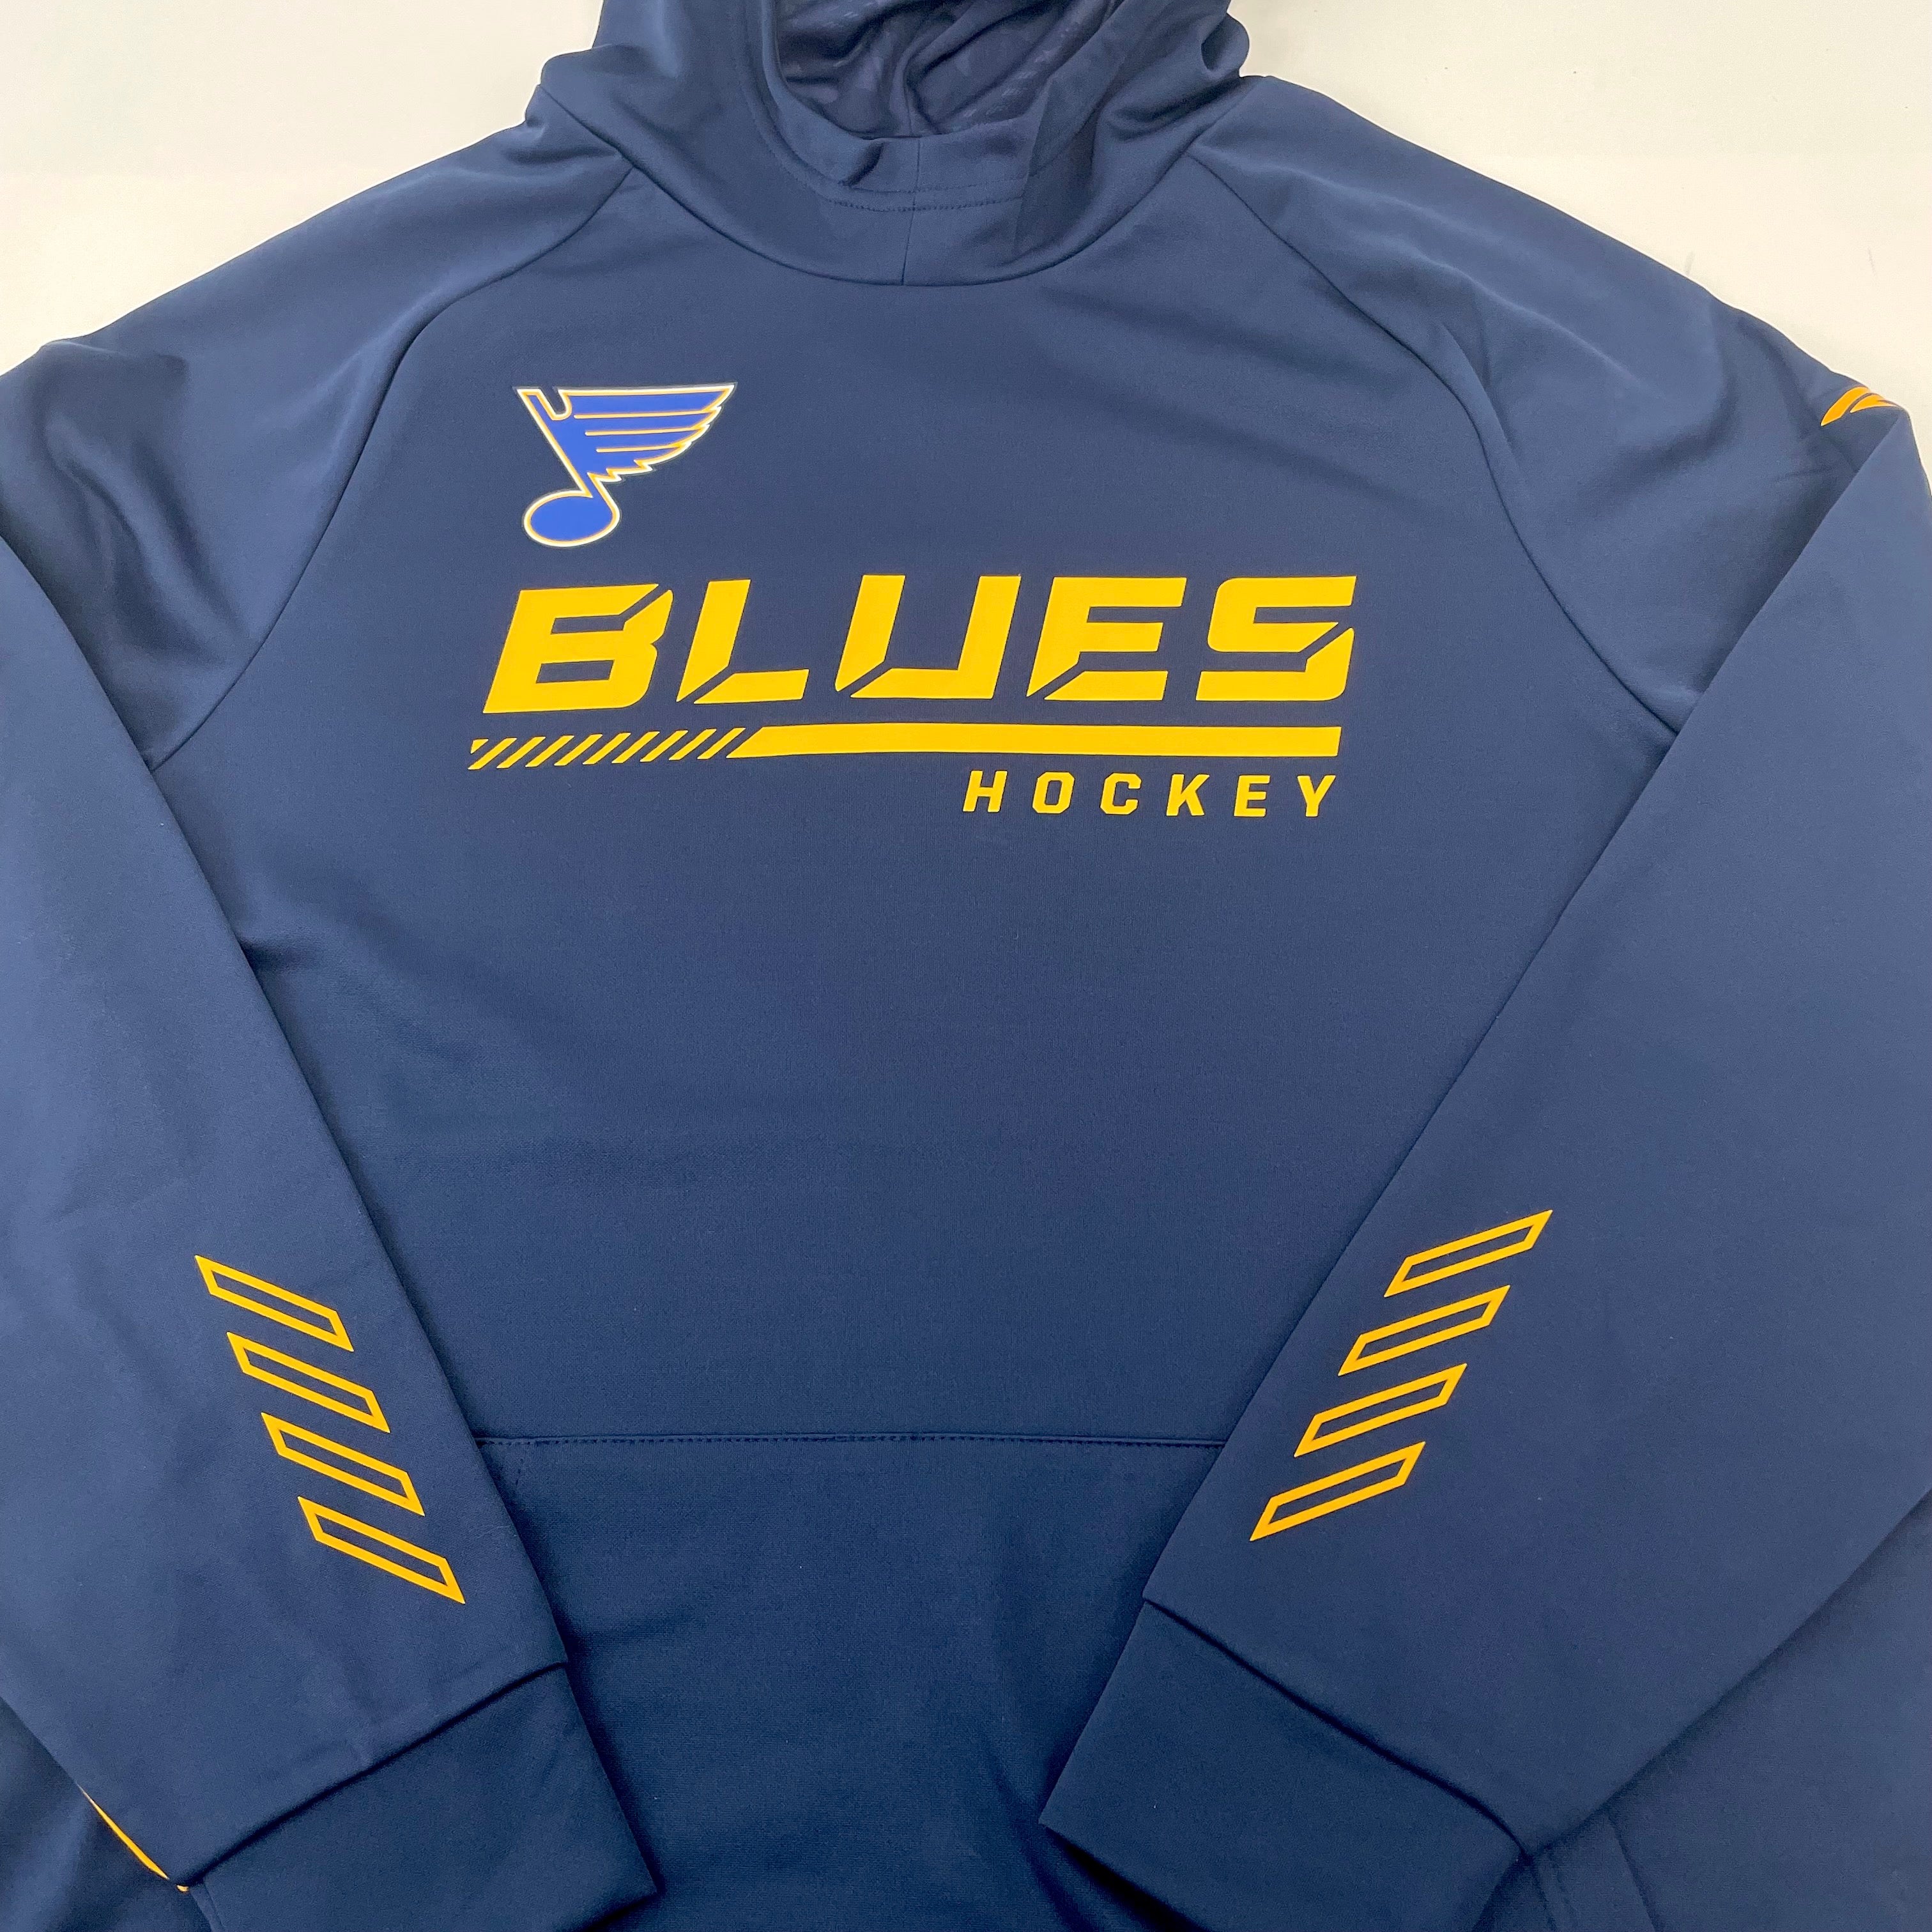 St Louis Blues Hockey - Womens XXL - zip up hoodie - blue and yellow